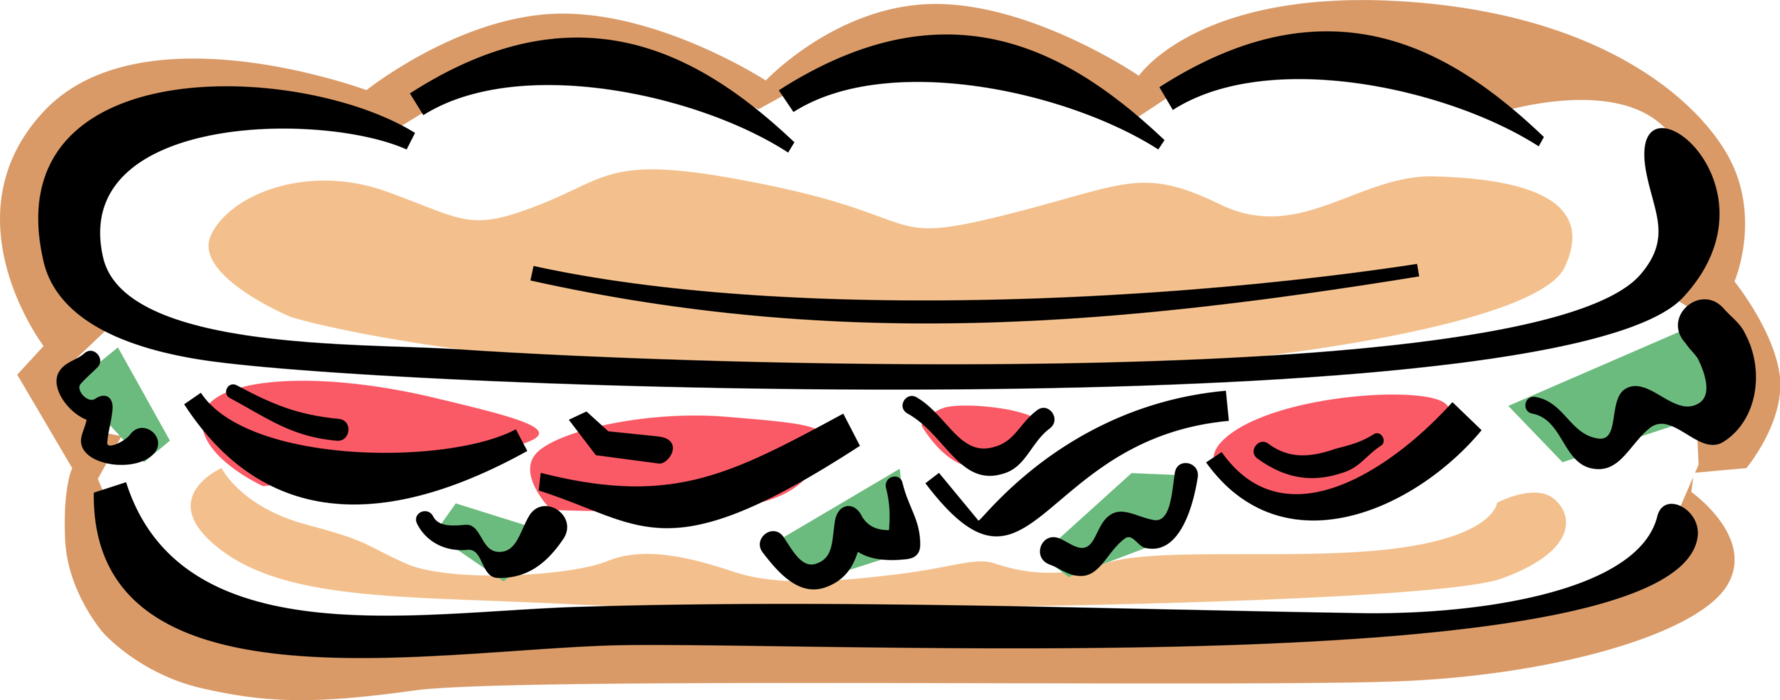 Vector Illustration of Sea Submarine or Hoagie Hero Sandwich with Lettuce, Tomato and Fresh Cold Cut Meats